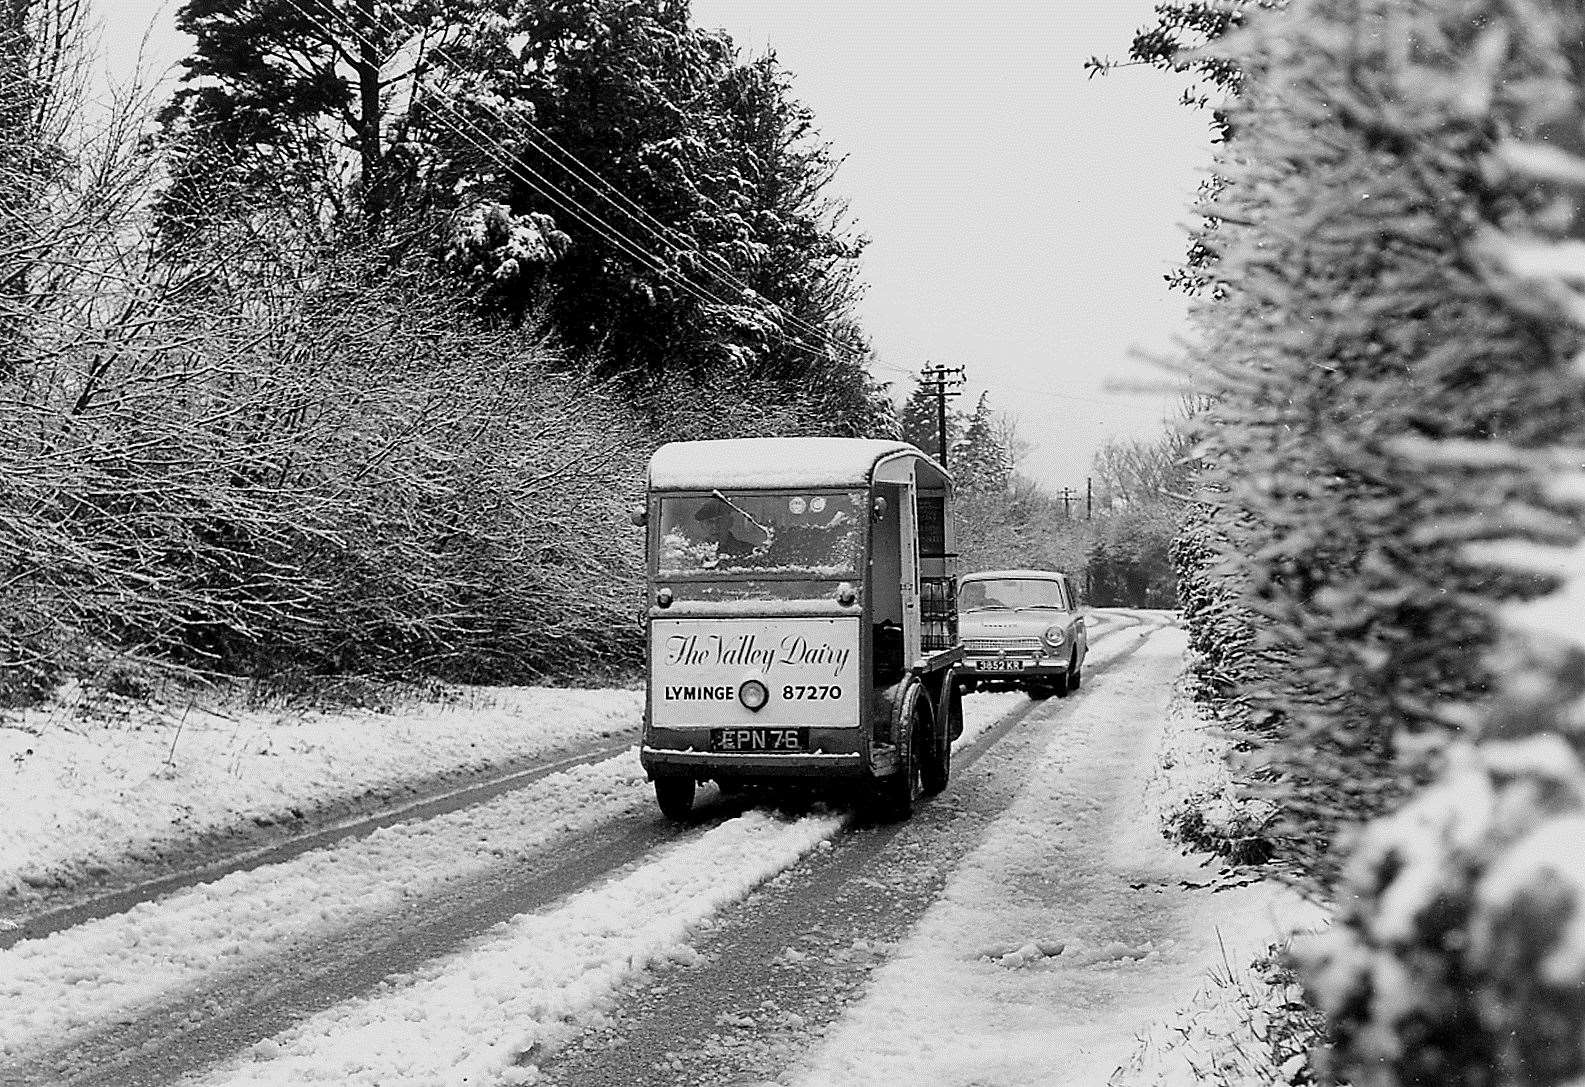 The Valley Dairy at Lyminge endeavours to get the milk through the snow in 1964